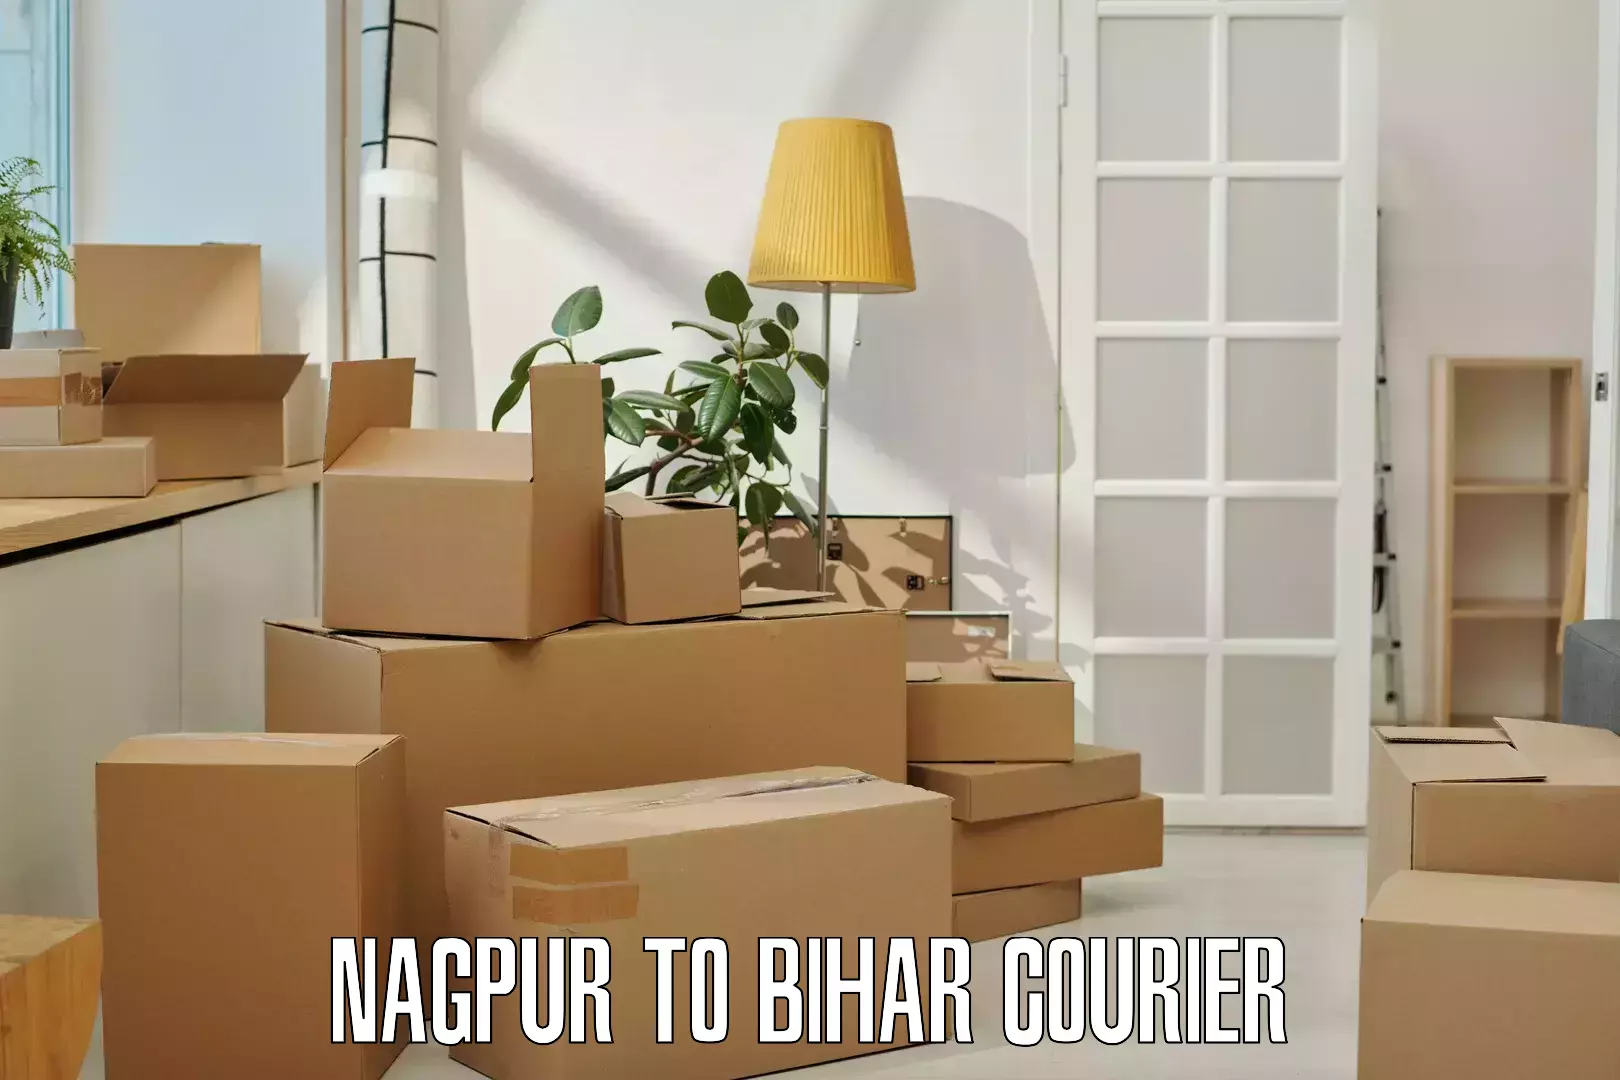 Reliable delivery network Nagpur to Bihar